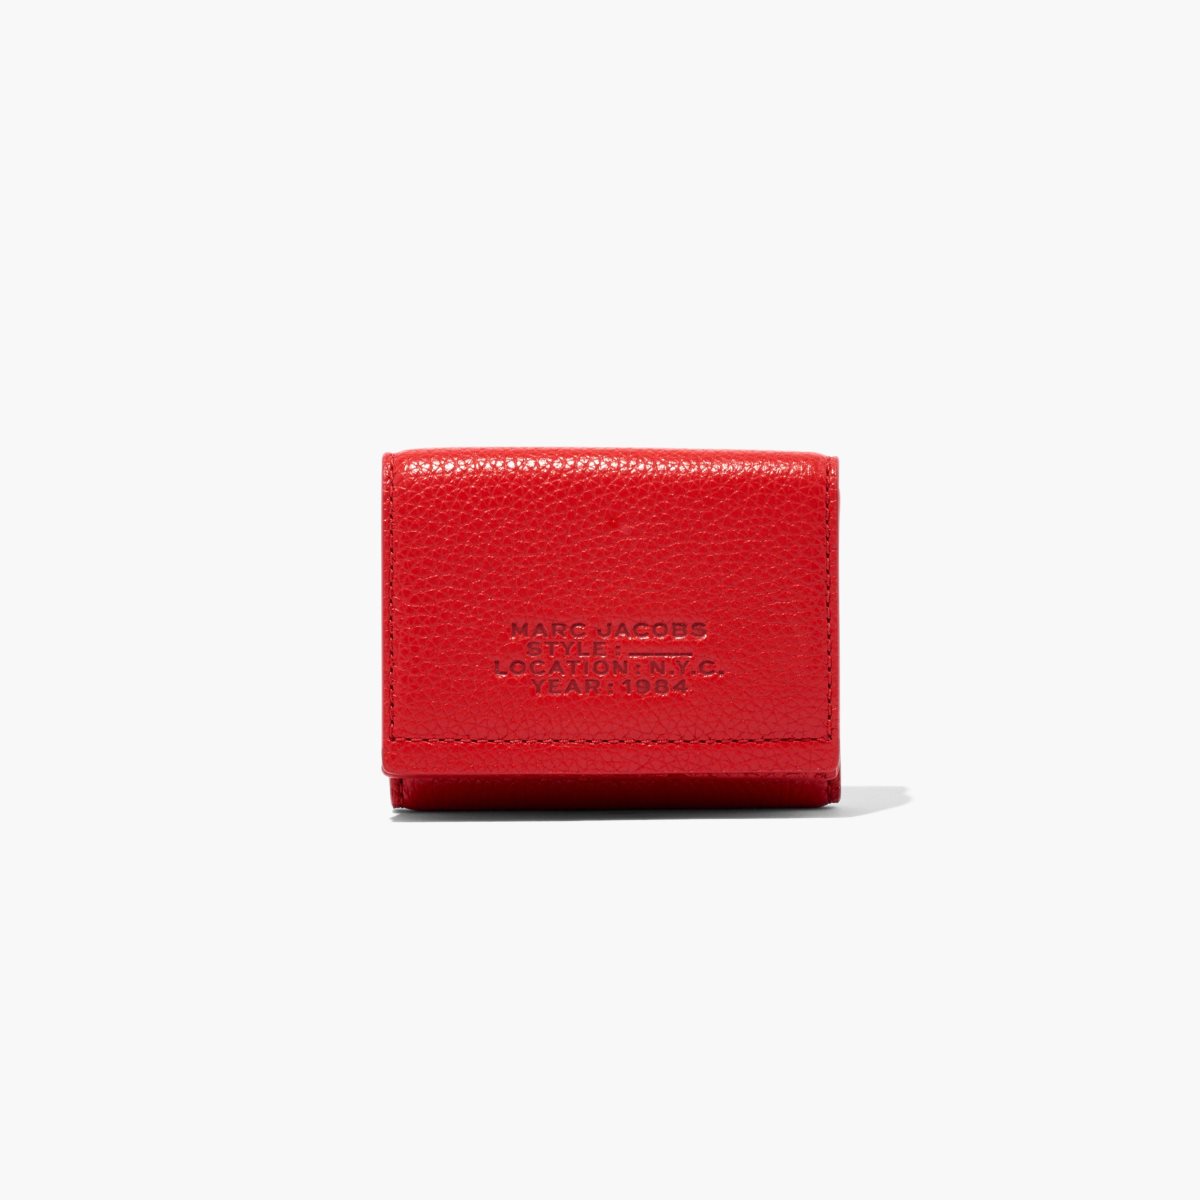 Marc Jacobs Leather Medium Trifold Wallet True Red | 4659IMUOX